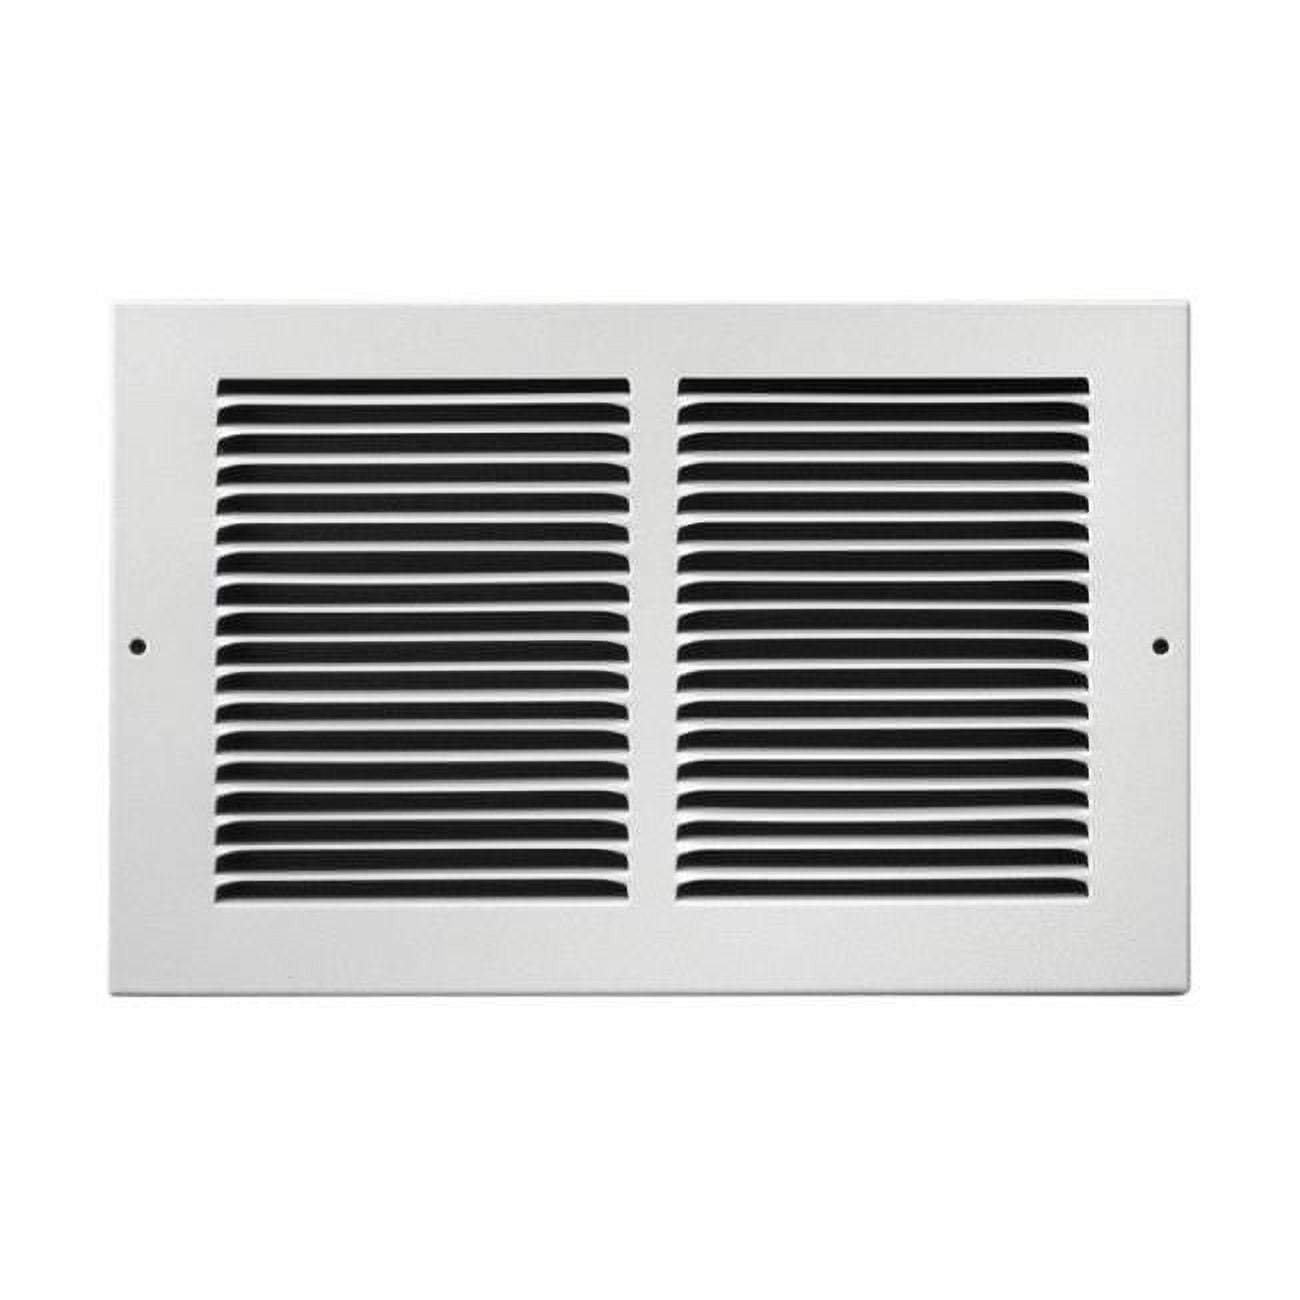 SEAL360 Strong Magnetic Vent Covers, Pocketed Design, 9.5 inch x 16 inch (White, 2-Pack) for Floor, Wall, or Ceiling Vents and Air Registers, RV, Home